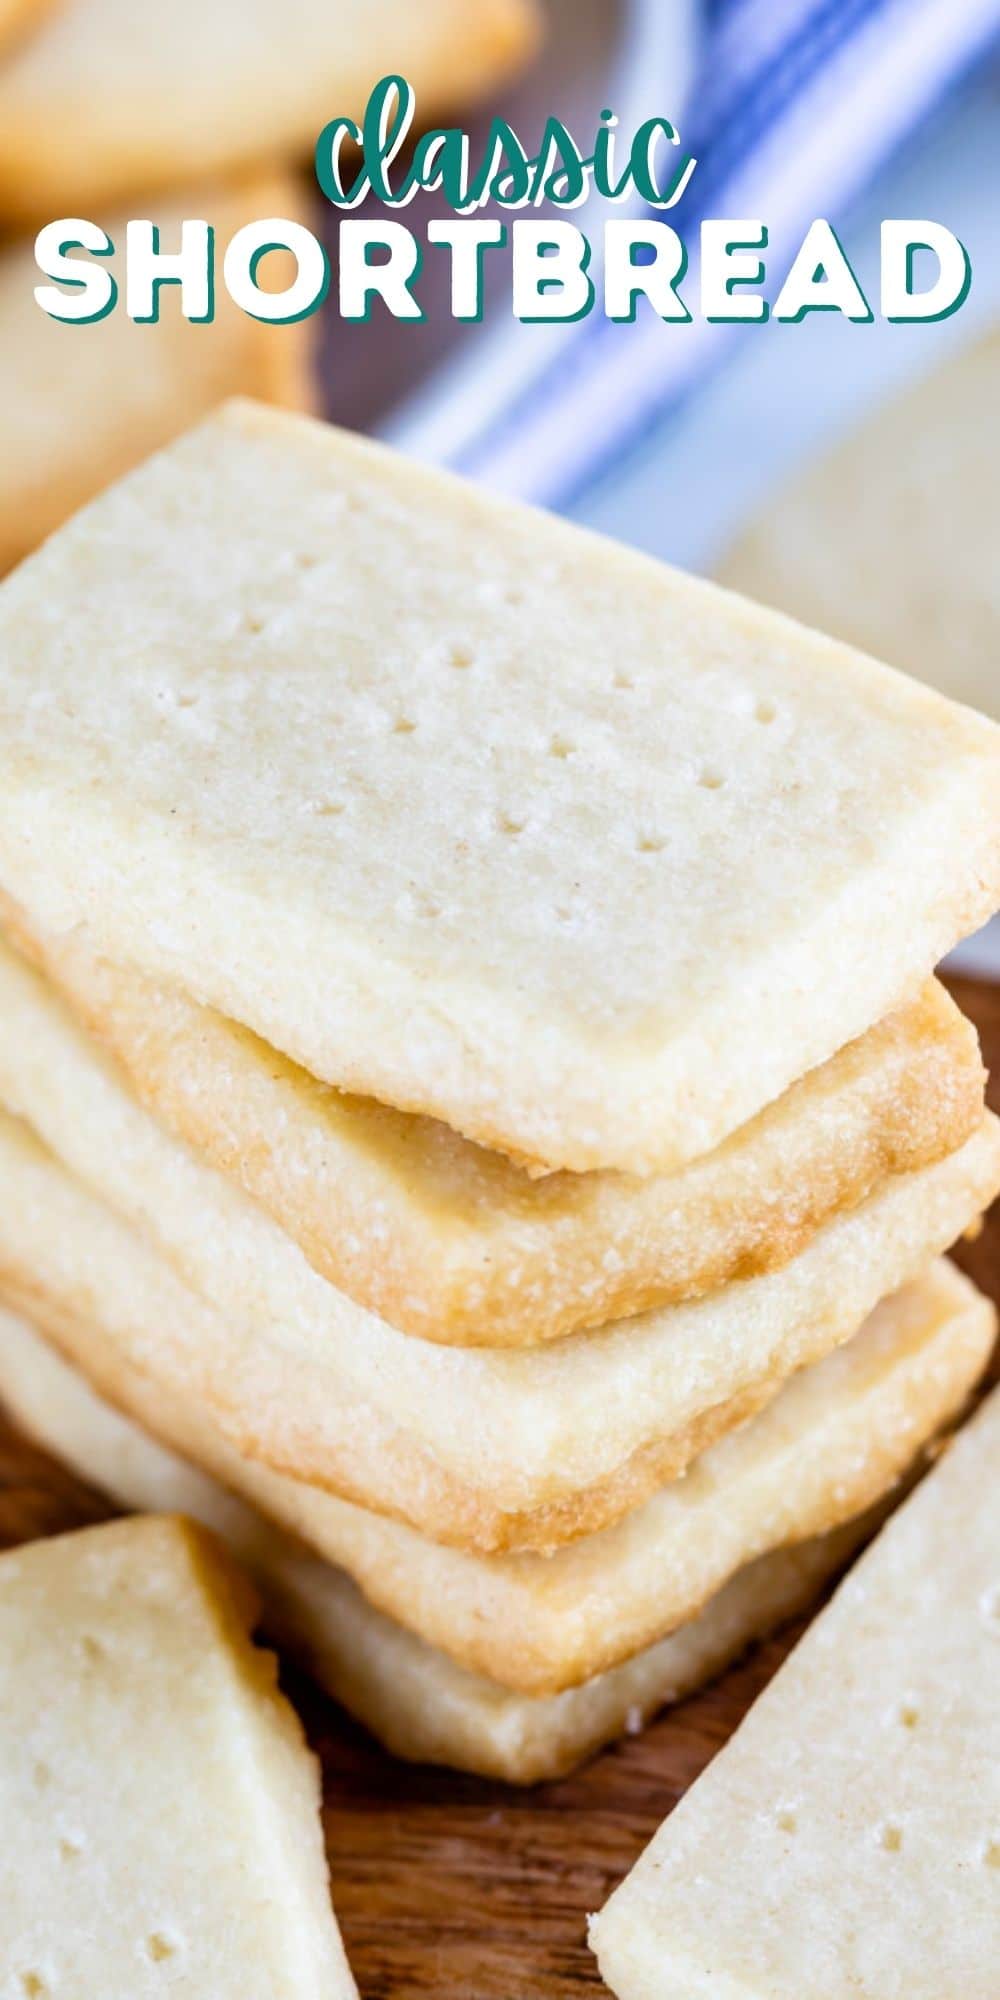 Stack of rectangular shortbread cookies on a wood cutting board with recipe title on top of image